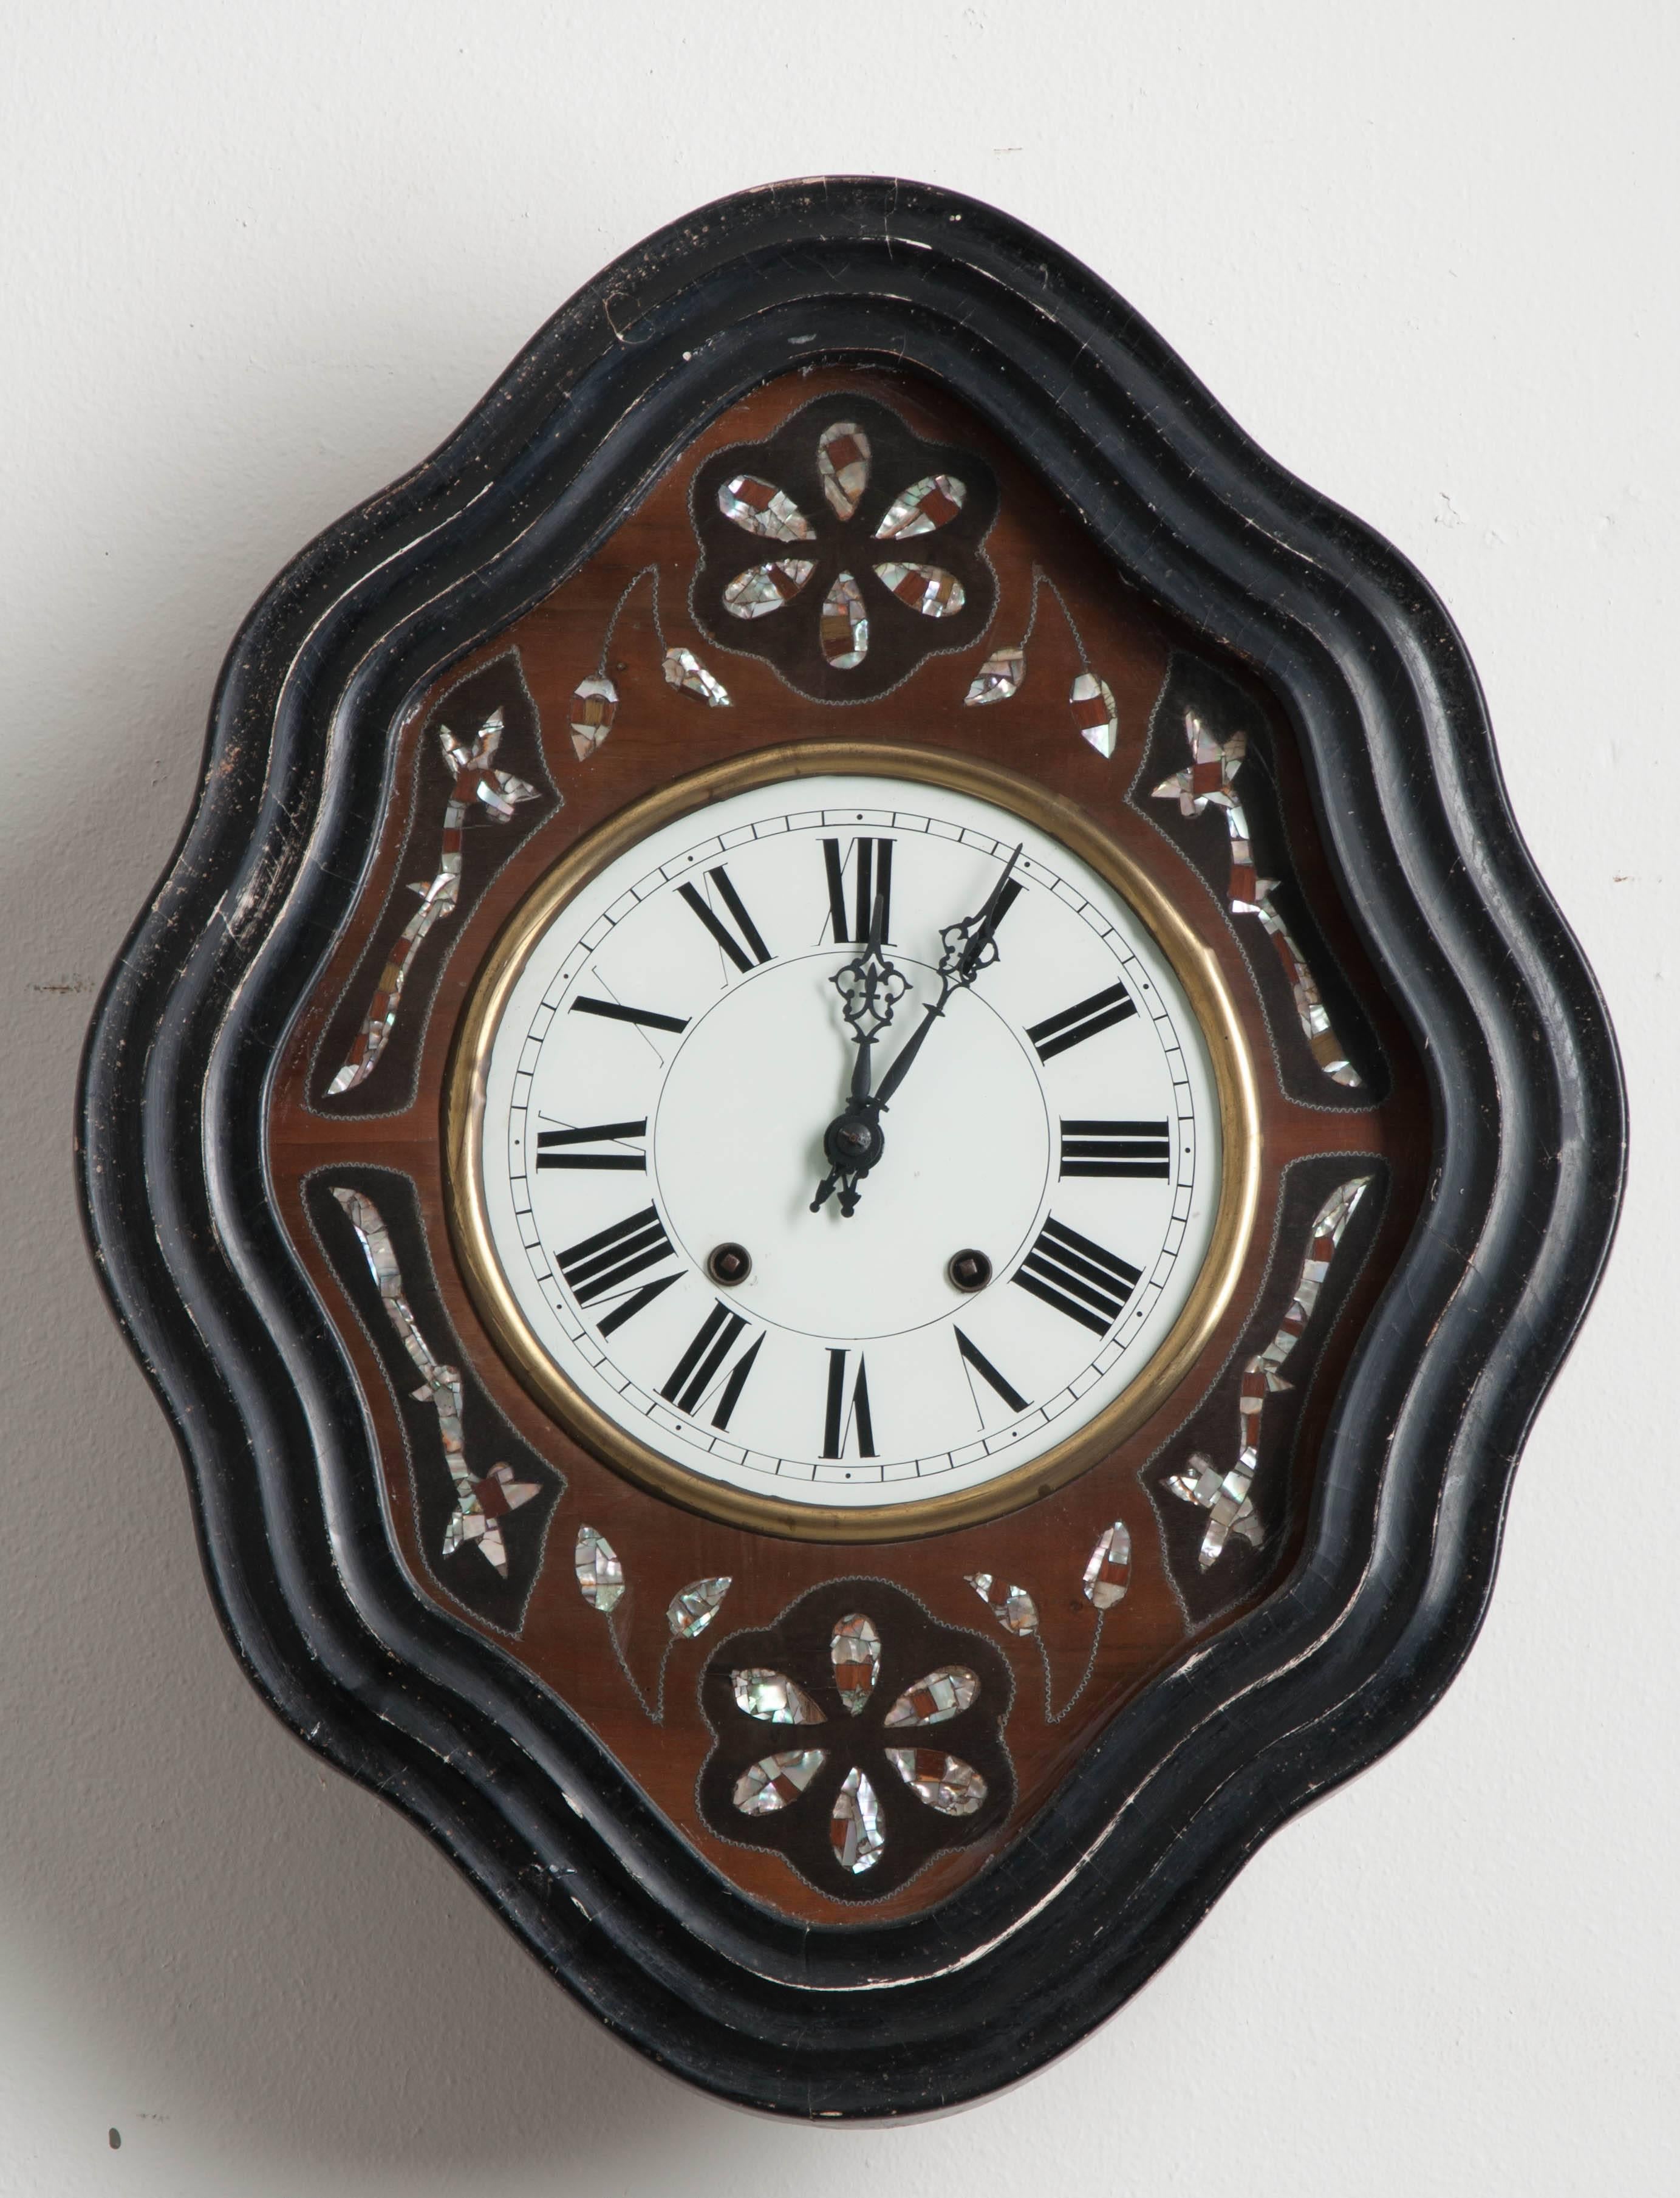 This 19th century clock is stunning with its diamond shaped rippling clock frame of ebony painted wood. Mother-of-pearl floral and foliate designs are inlaid in differently stained mahogany and brilliant mother-of-pearl, surrounding the porcelain